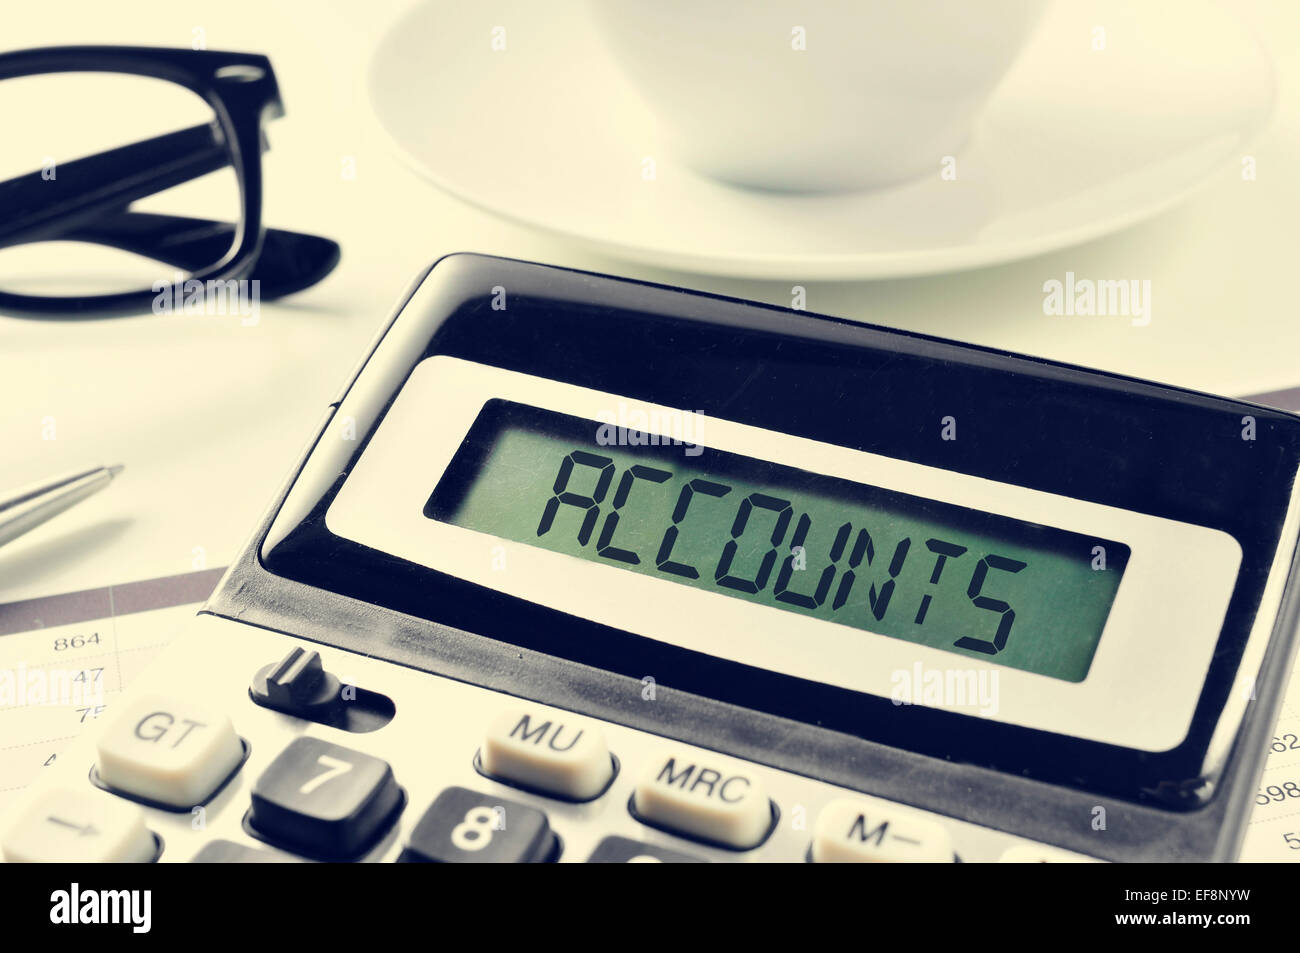 the word accounts written in the display of a calculator on an office desk, with a cup of coffee or tea in the background Stock Photo